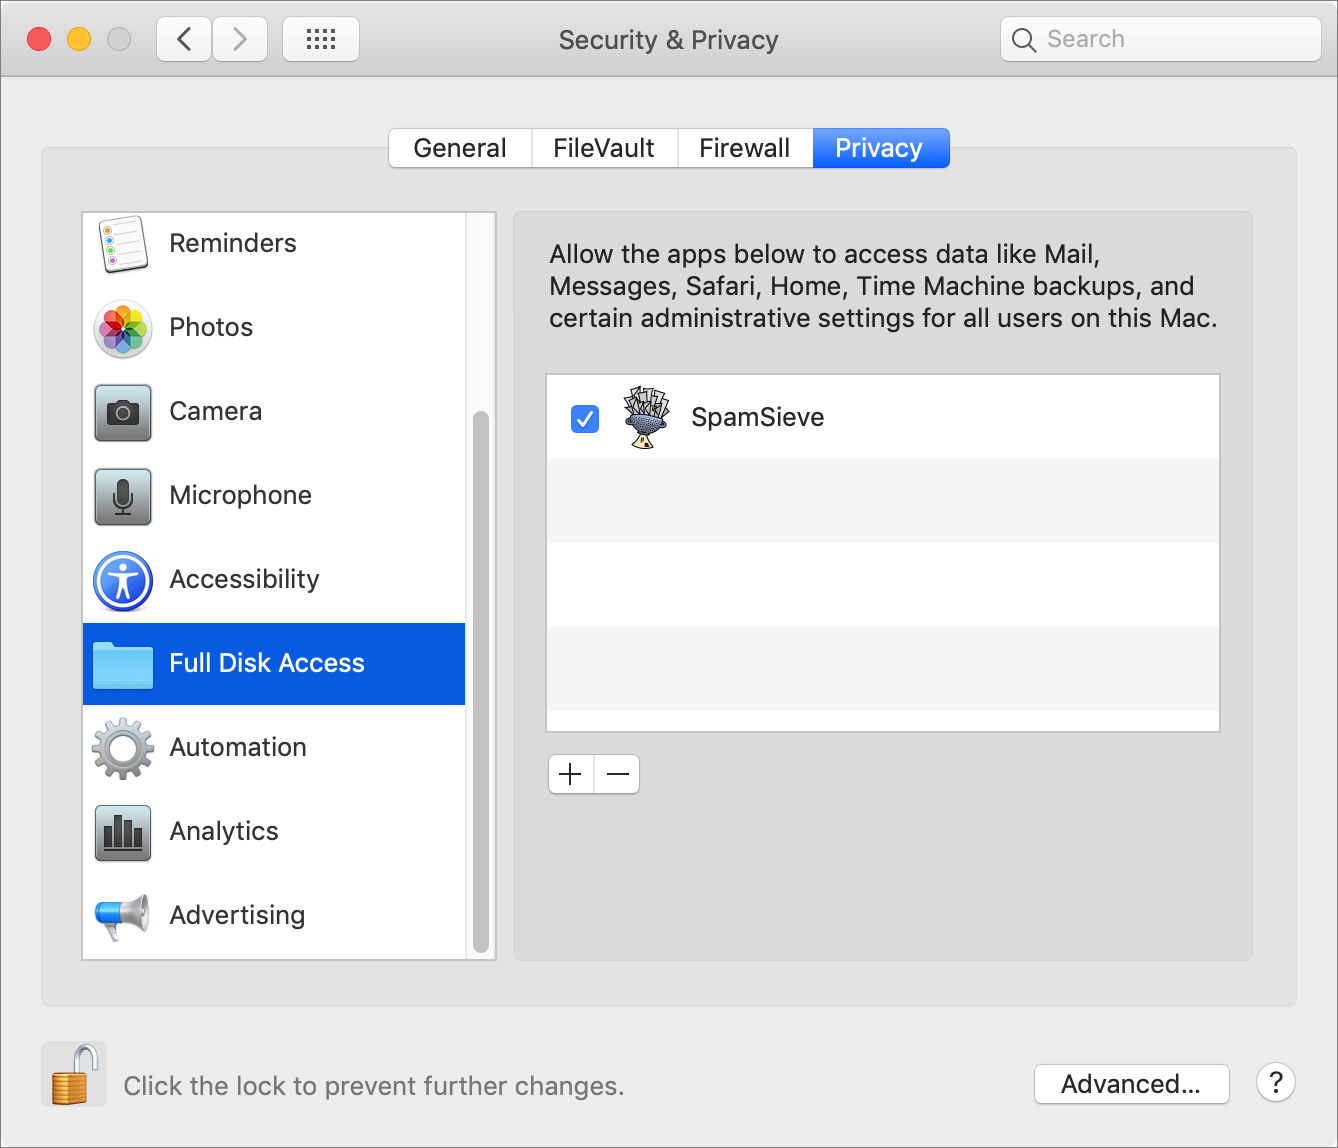 Figure 15: The Full Disk Access category on the Privacy tab enables apps to access data anywhere on your disk, even potentially sensitive files such as email or messages.